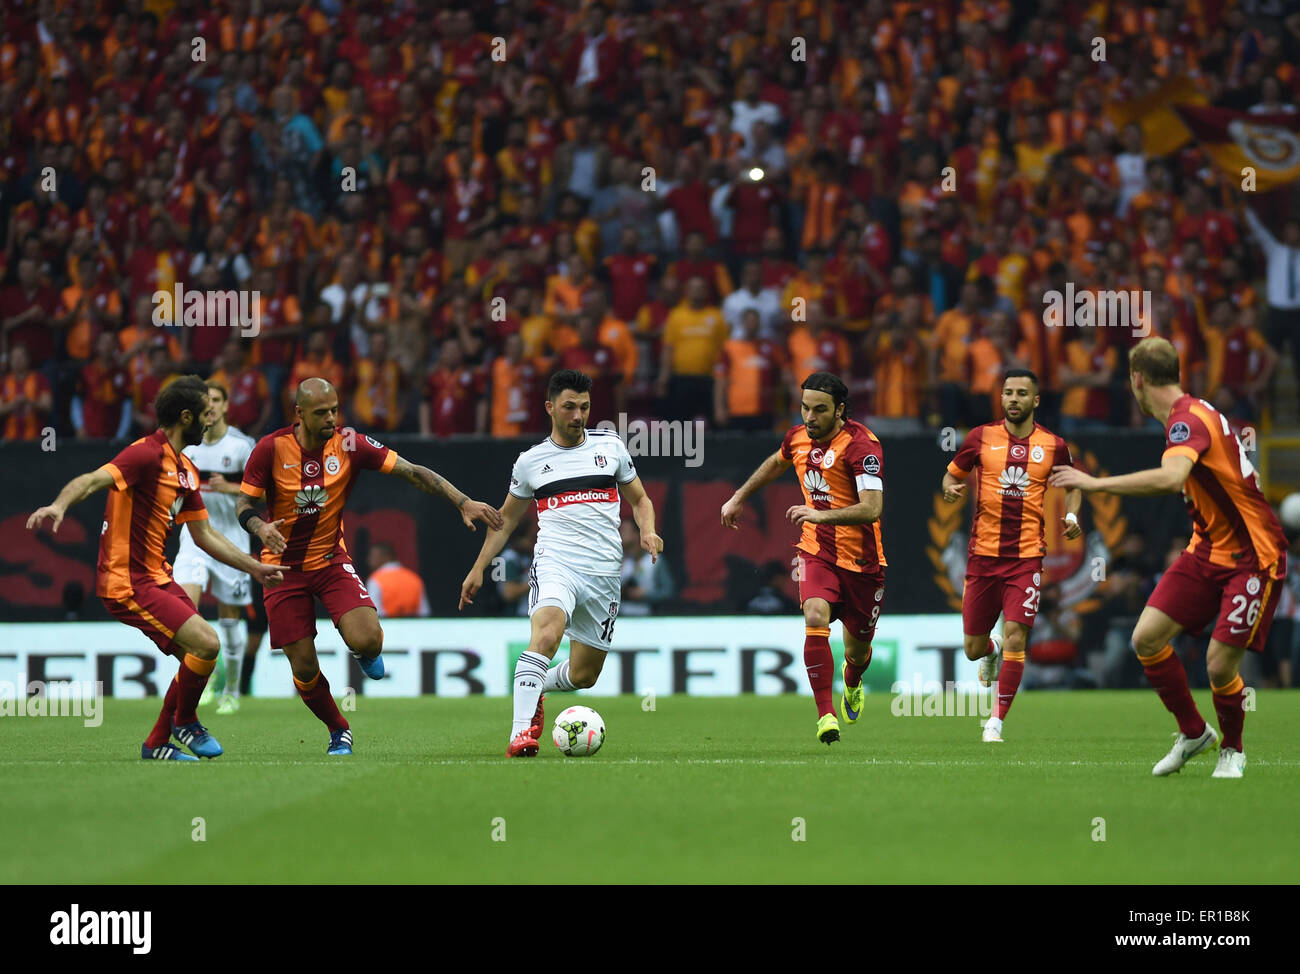 Istanbul, Turkey. 24th May, 2015. Besiktas' Tolgay Ali Arslan(4th, R)  controls the ball during the Turkish Super League against Galatasaray in  Istanbul, Turkey, on May 24, 2015. Galatasaray won 2-0. © He